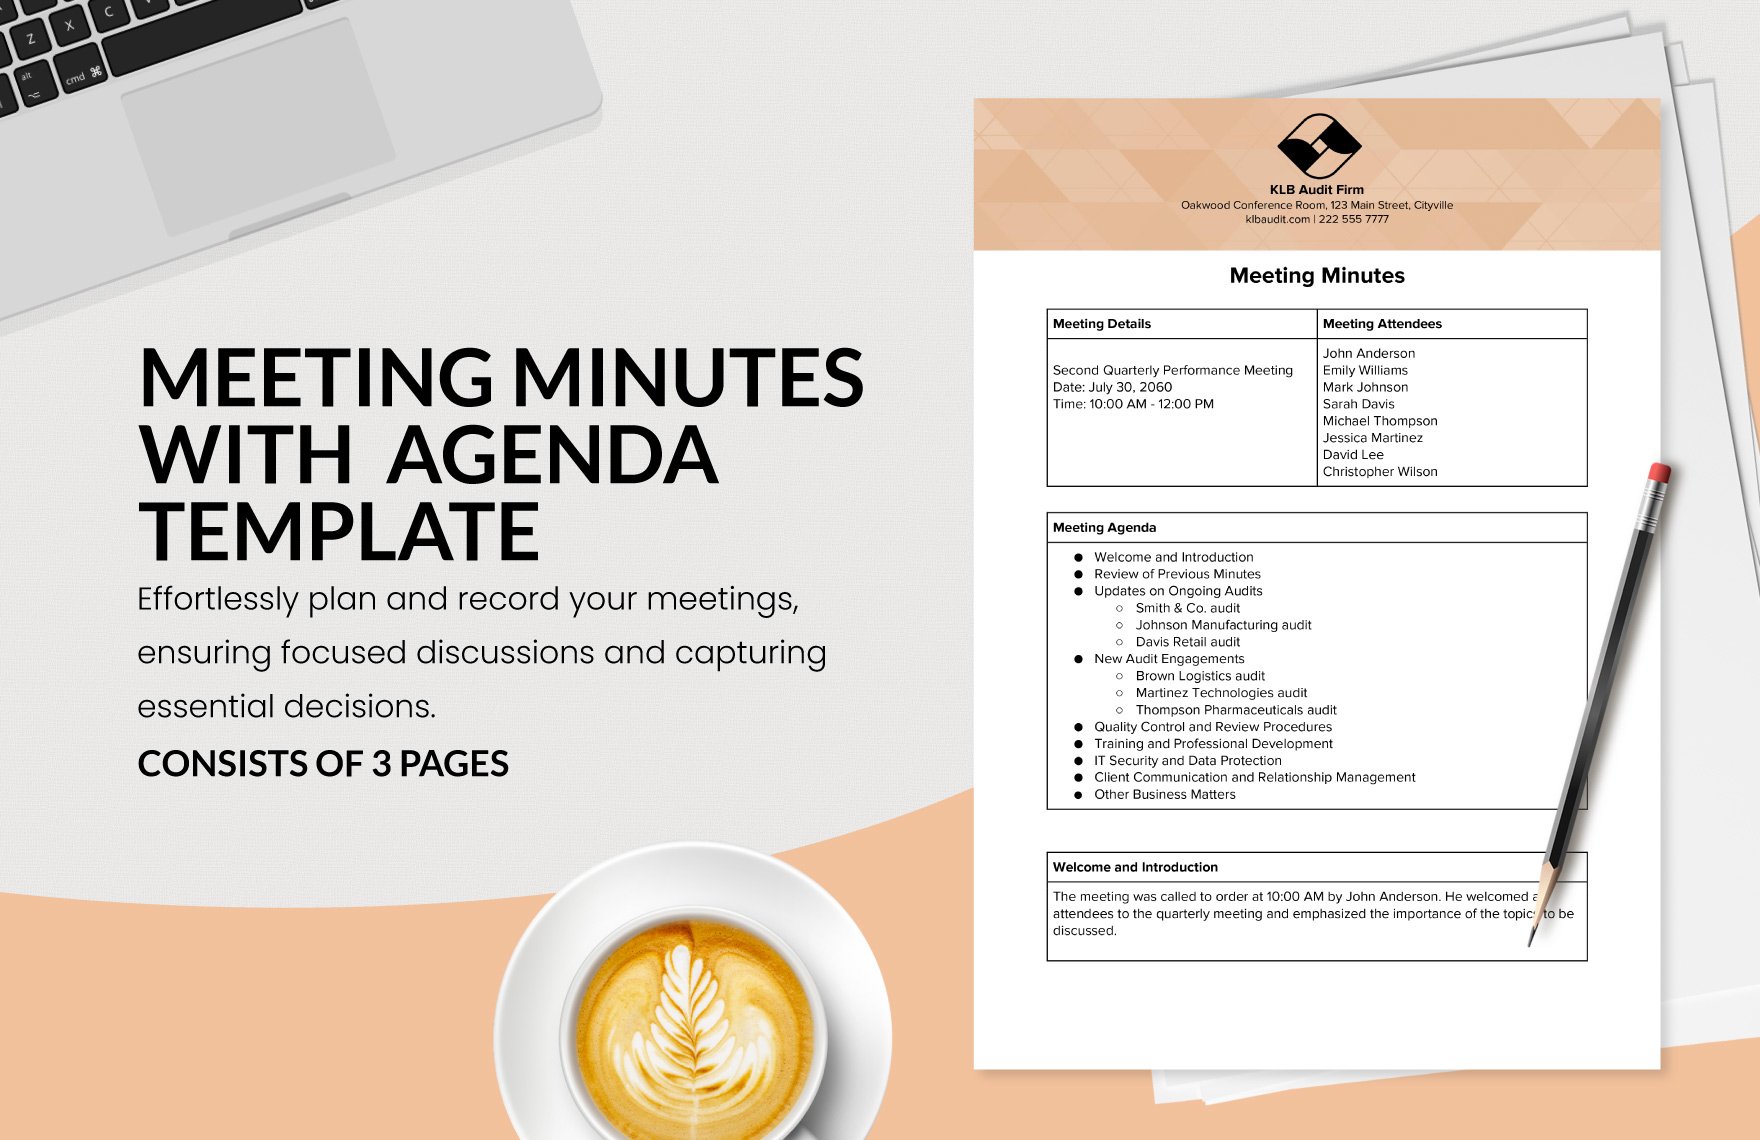 Meeting Minutes with Agenda Template in Word, Google Docs, PDF, Apple Pages